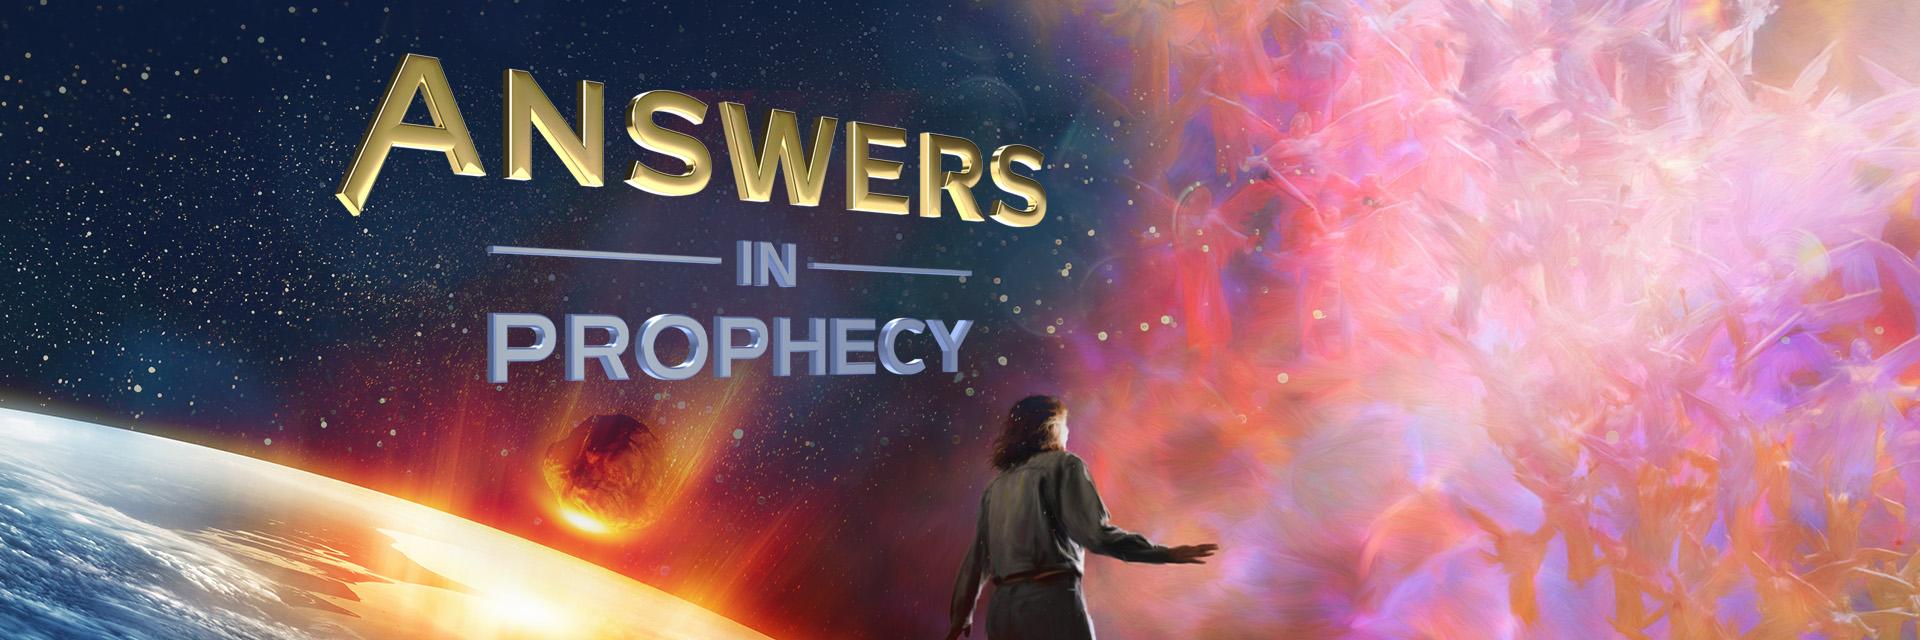 Answers in Prophecy image